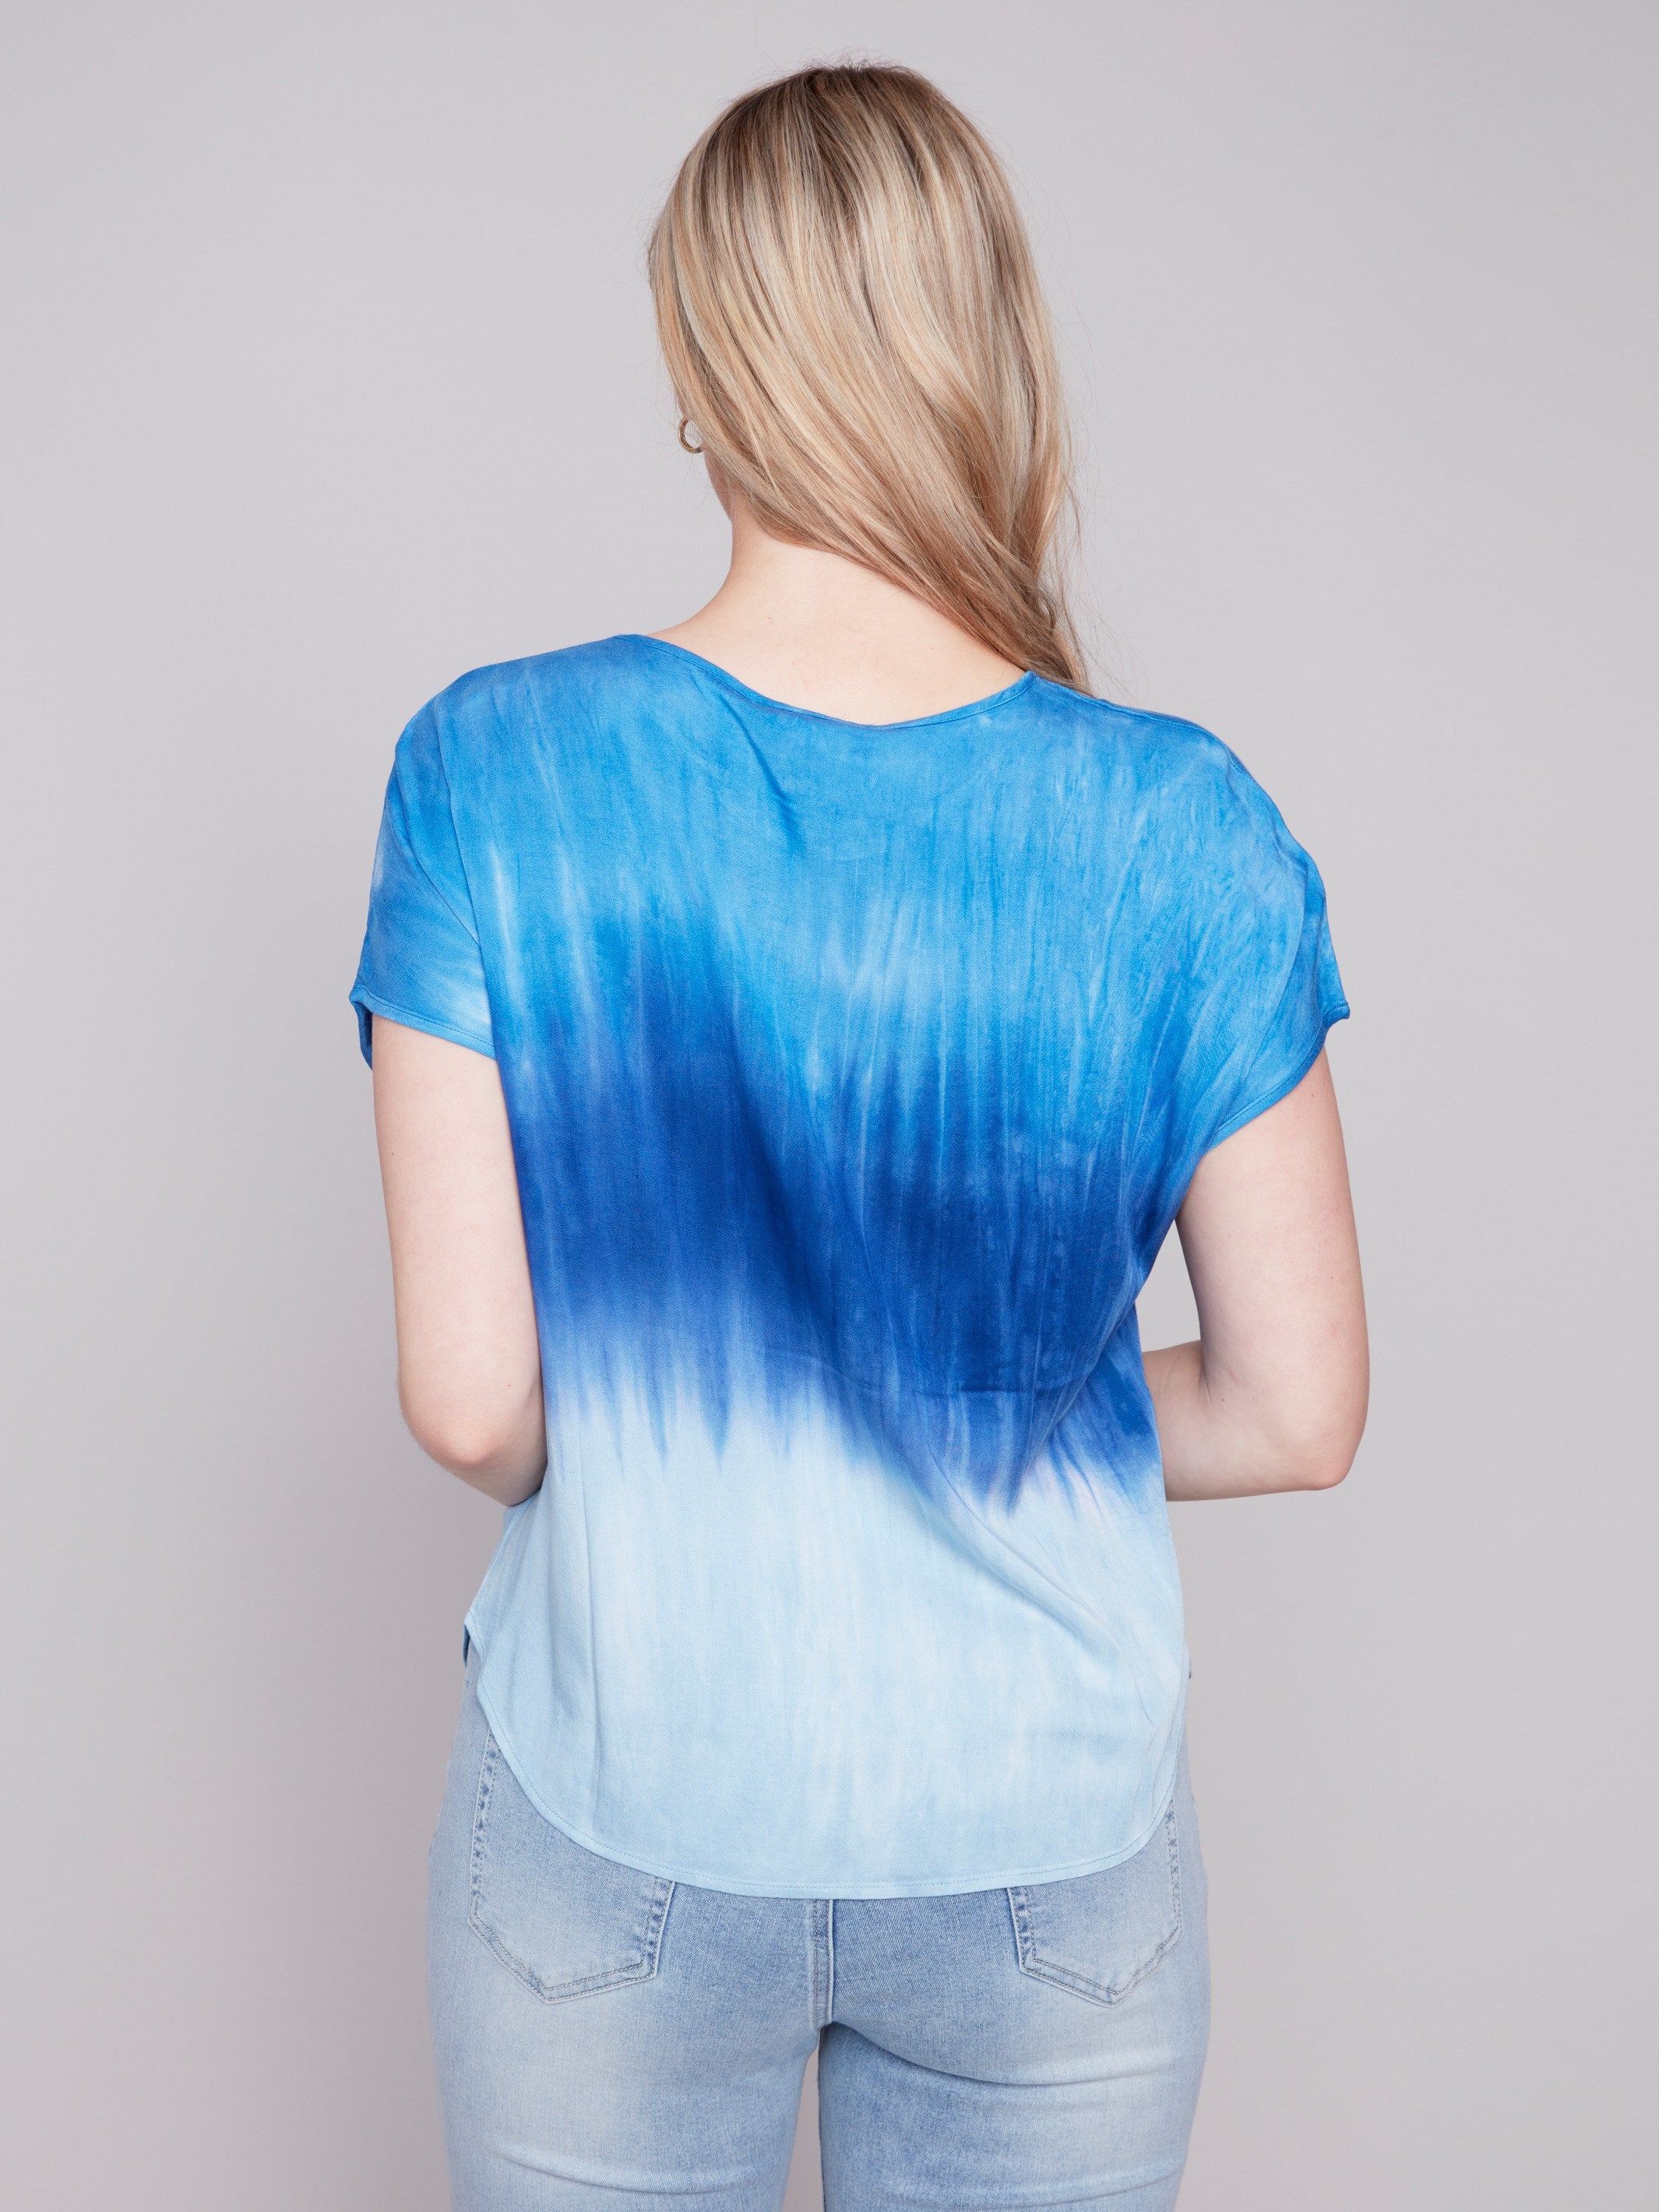 Tie Dye Dolman Top - Sky - Charlie B Collection Canada - Image 2